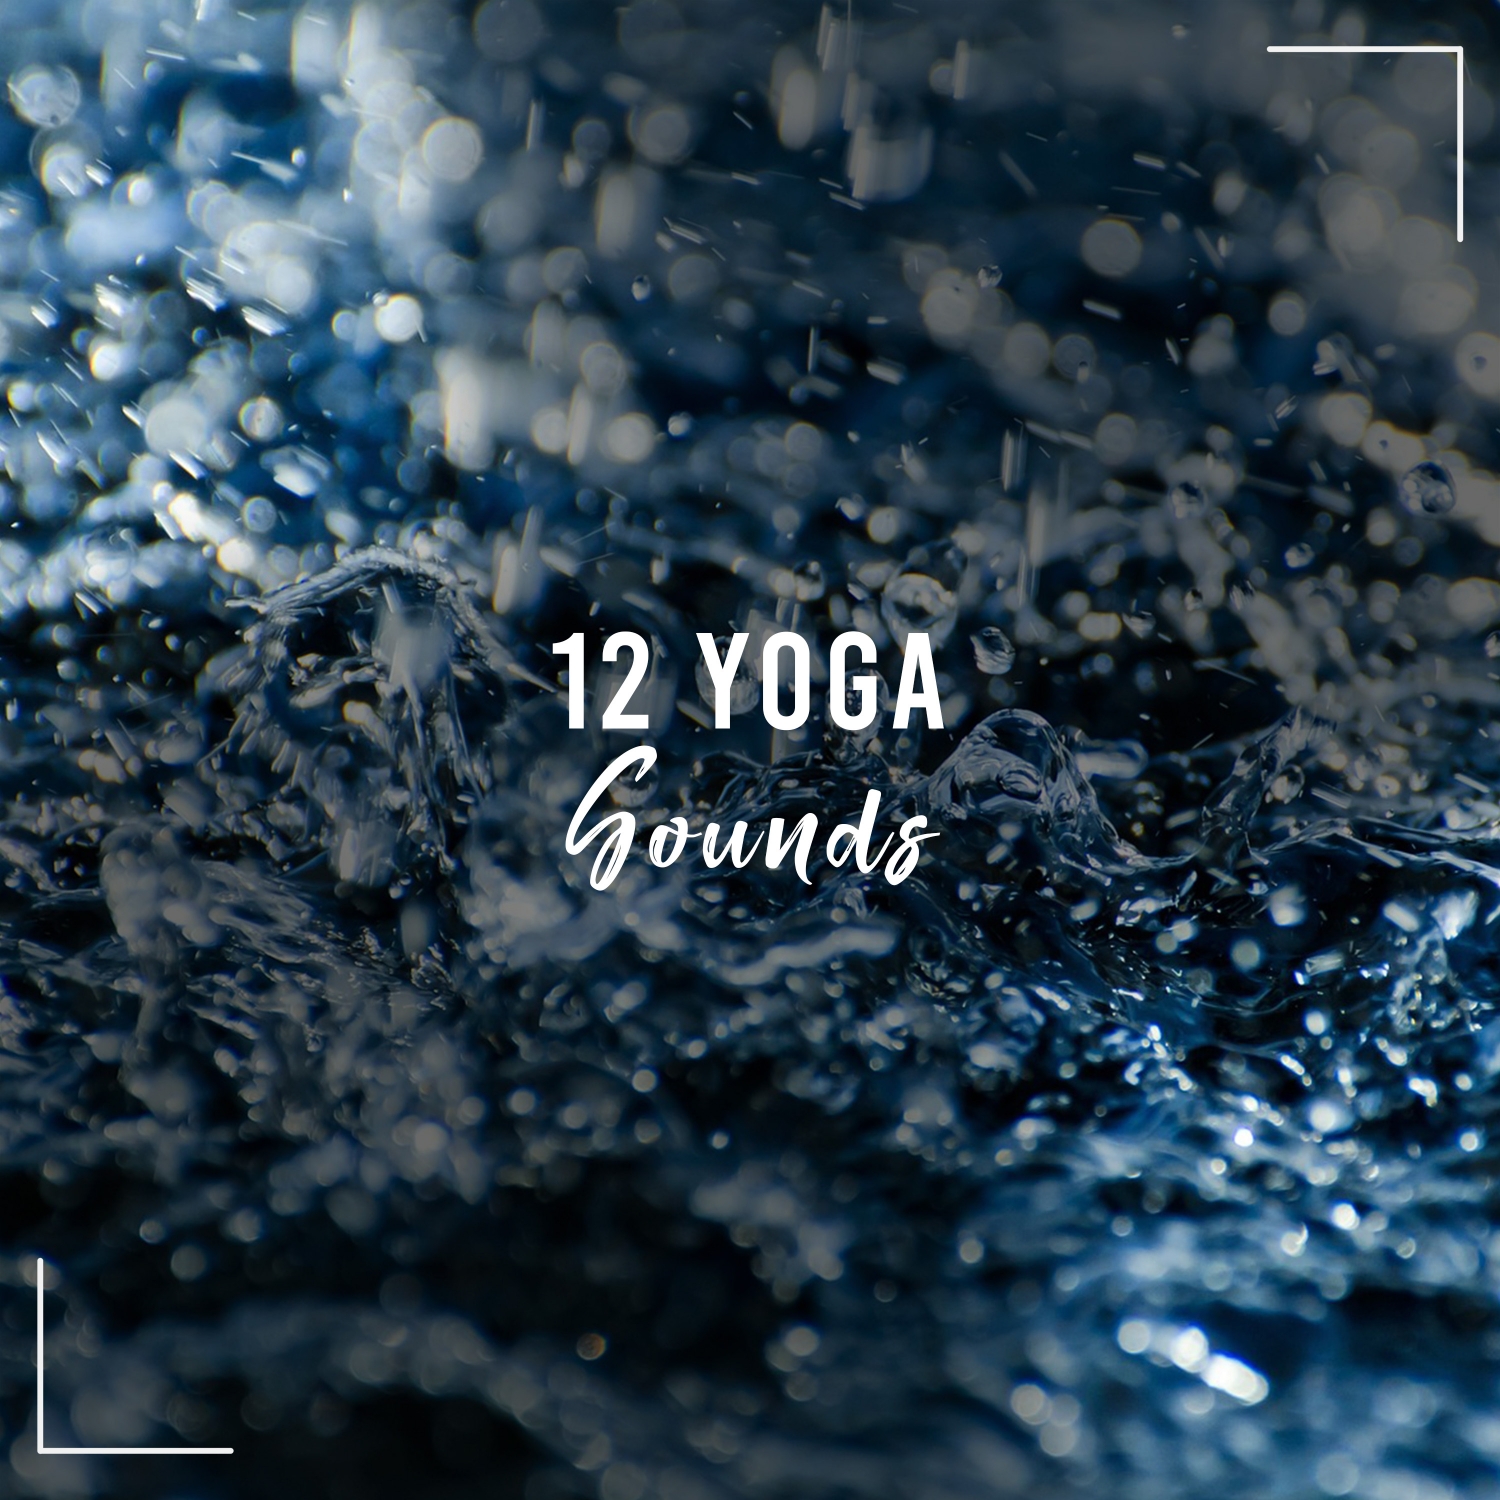 12 Yoga Sounds from Nature - Perfect for Classes